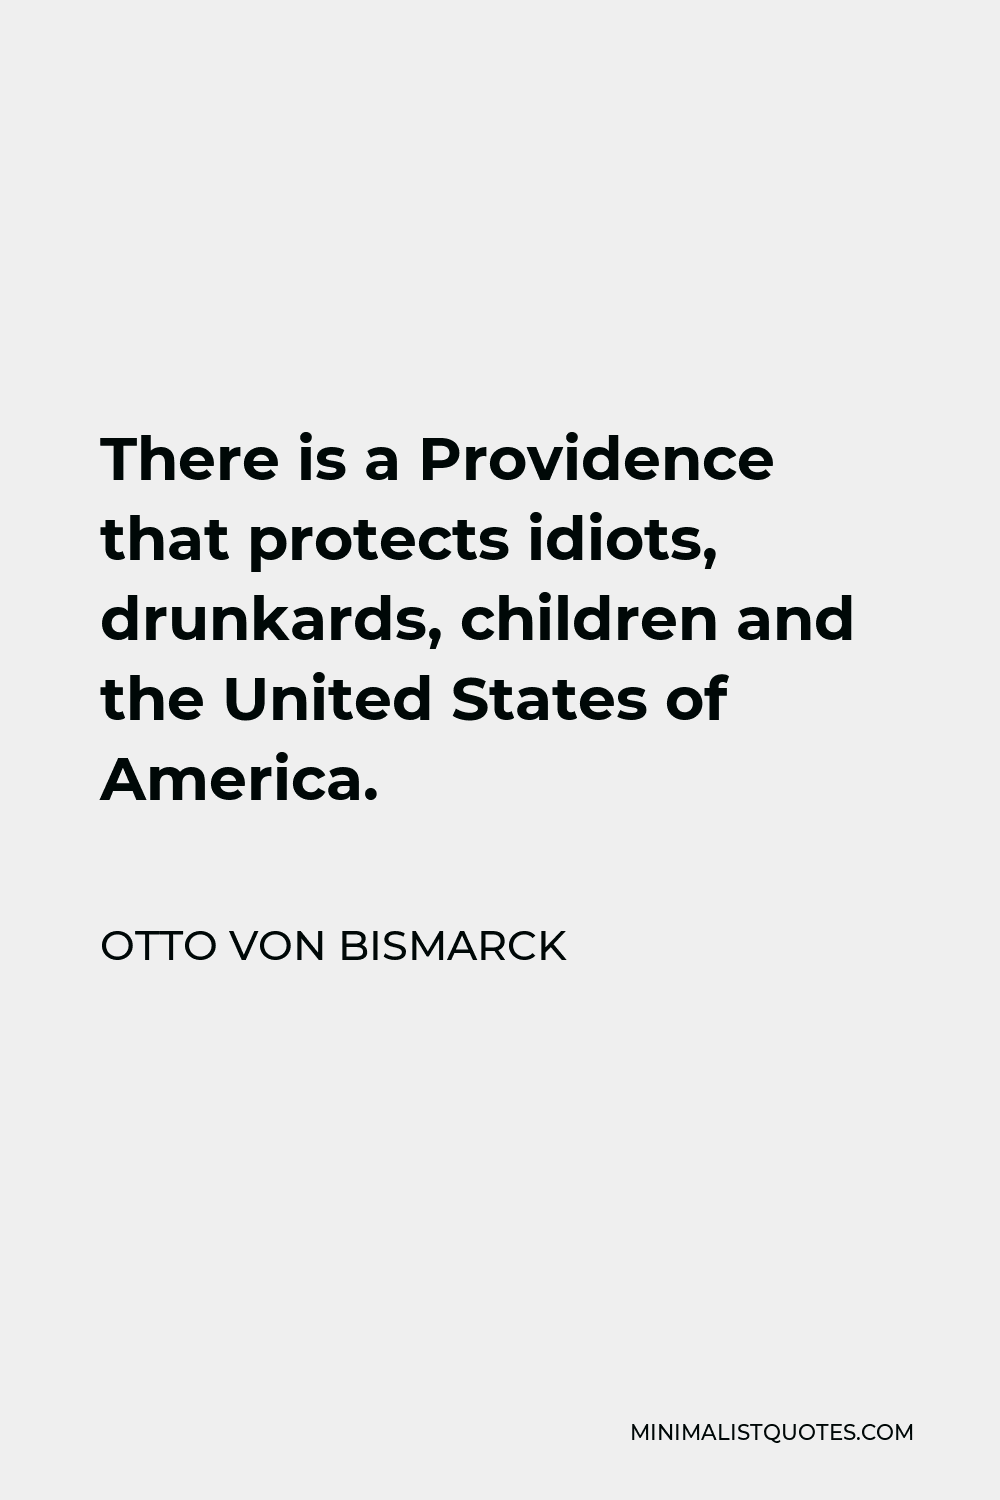 Otto von Bismarck Quote - There is a Providence that protects idiots, drunkards, children and the United States of America.